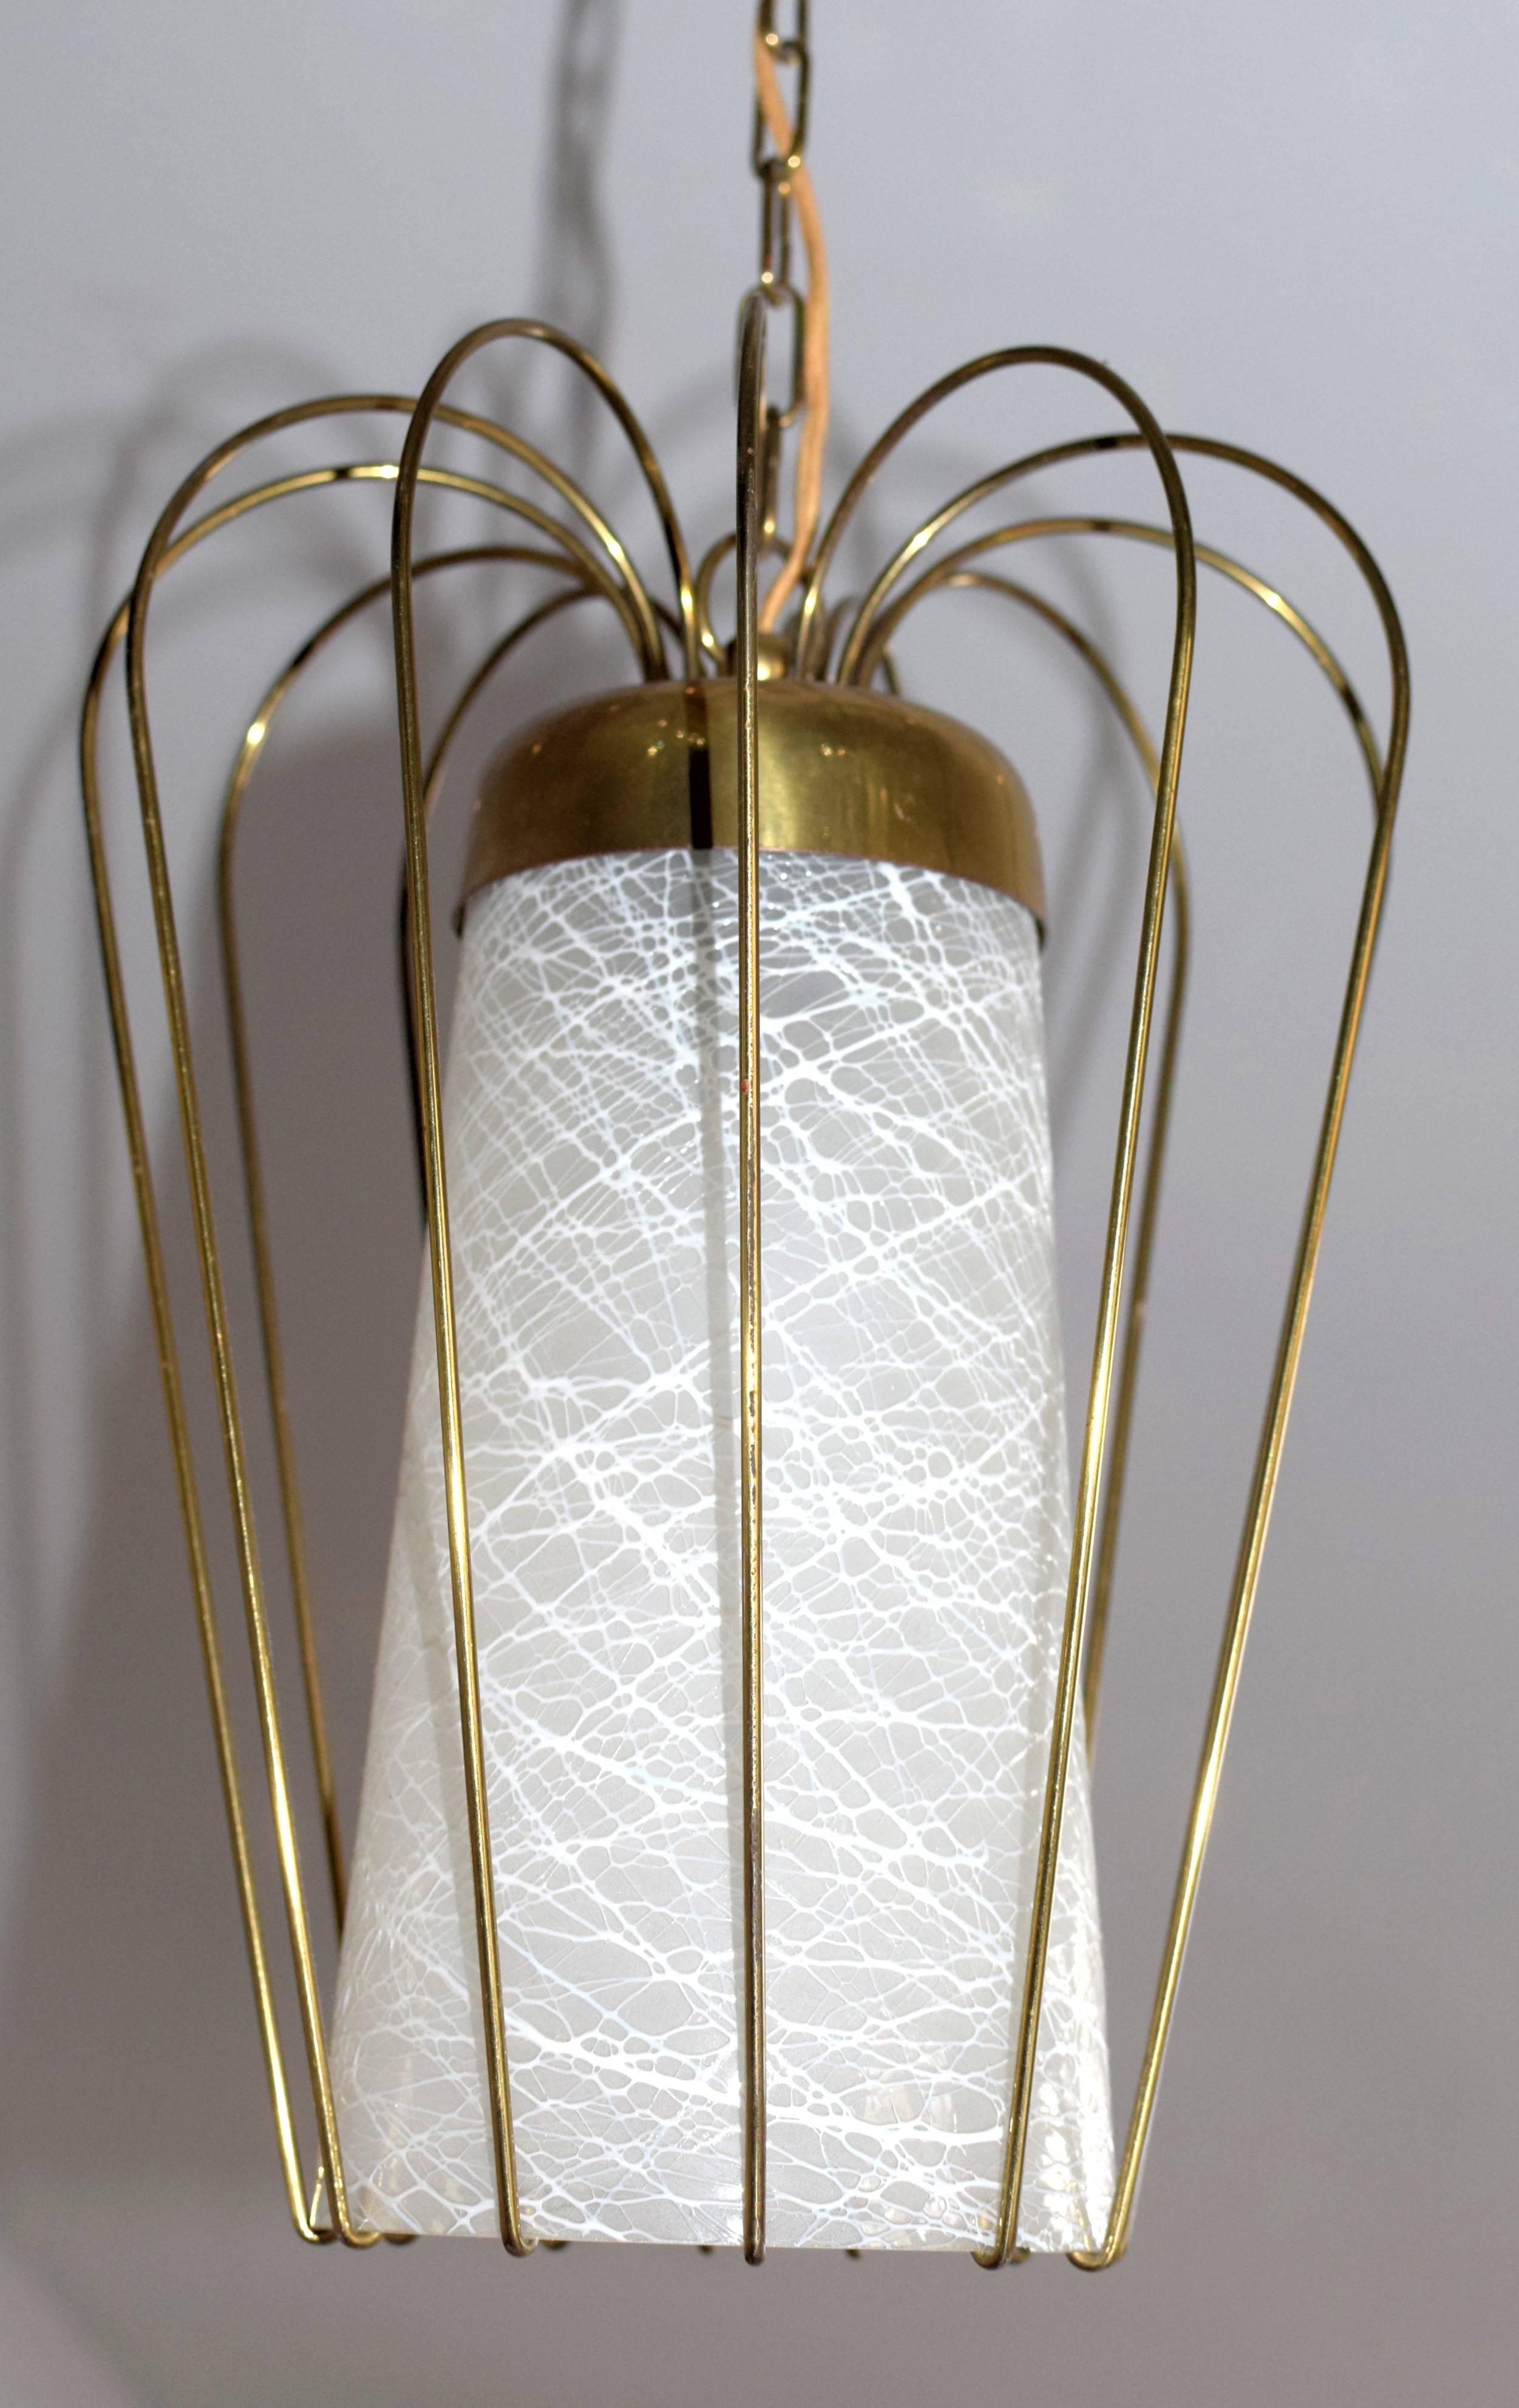 Nice Midcentury glass pendant made by J.T. Kalmar.
Satinated glass with melted white glass threads.
Fixture and chain made of brass.

Two matching sconces are also available
Measures: Height 60 cm.